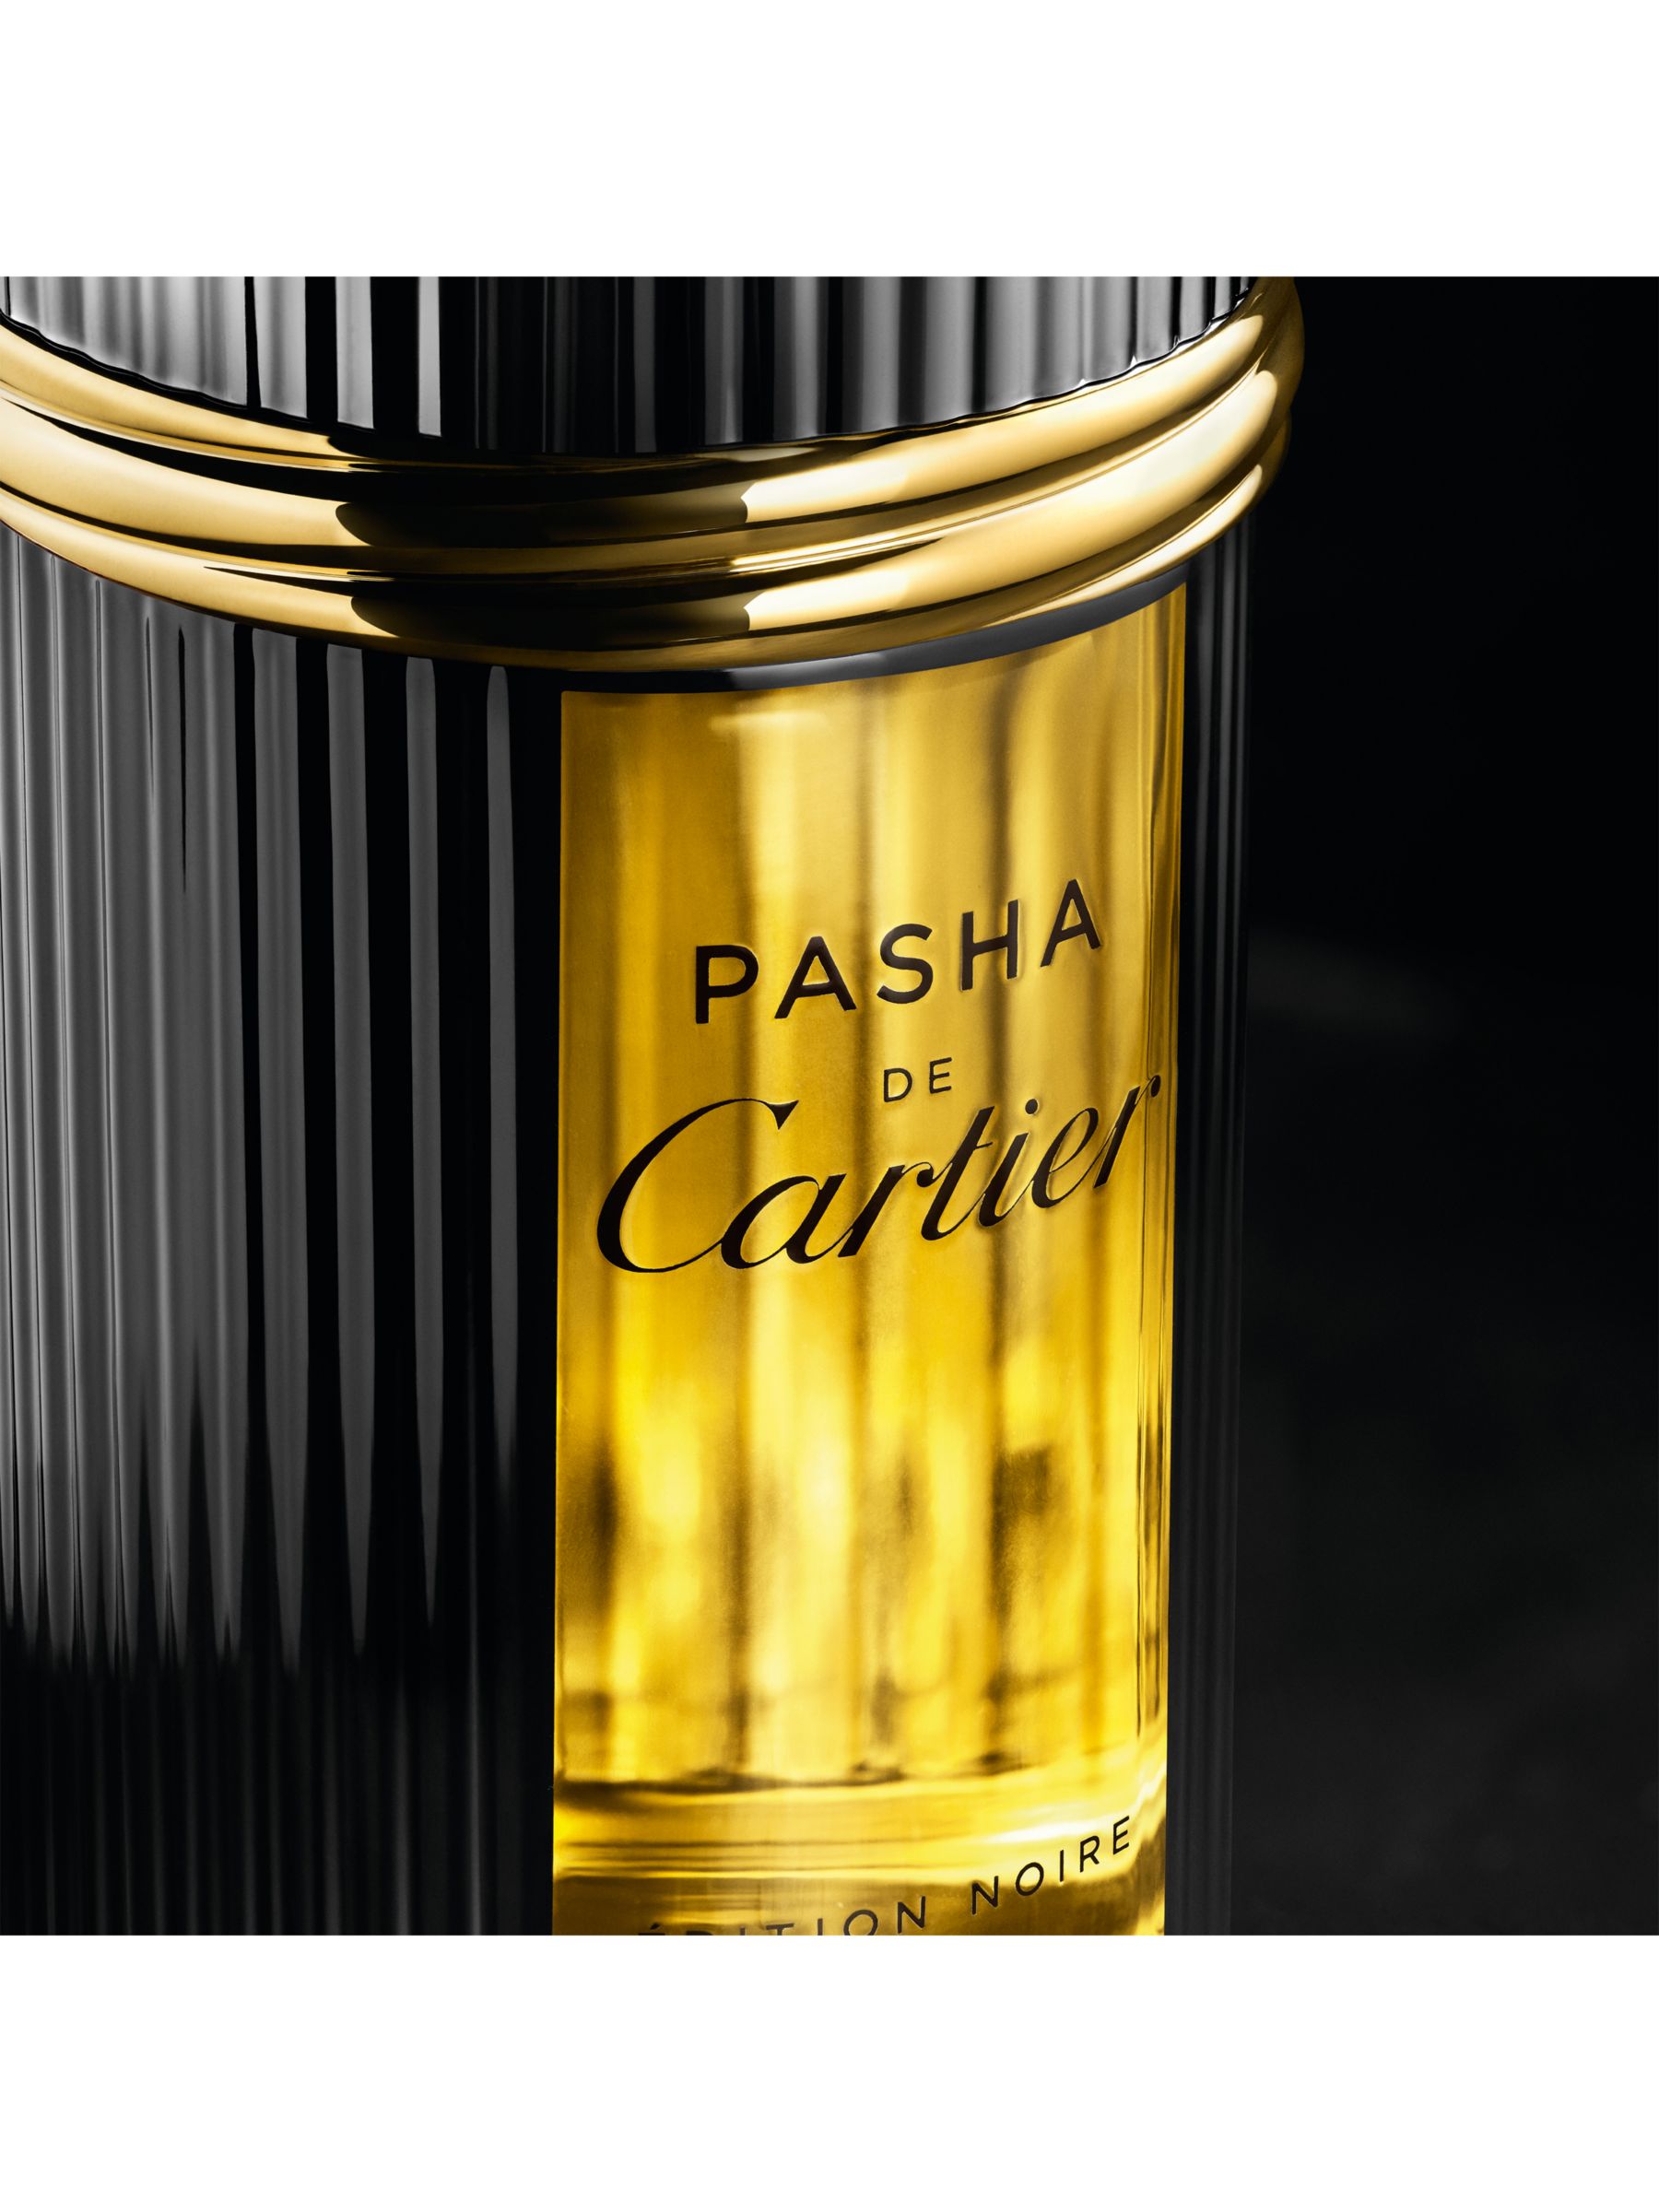 cartier pasha limited edition perfume